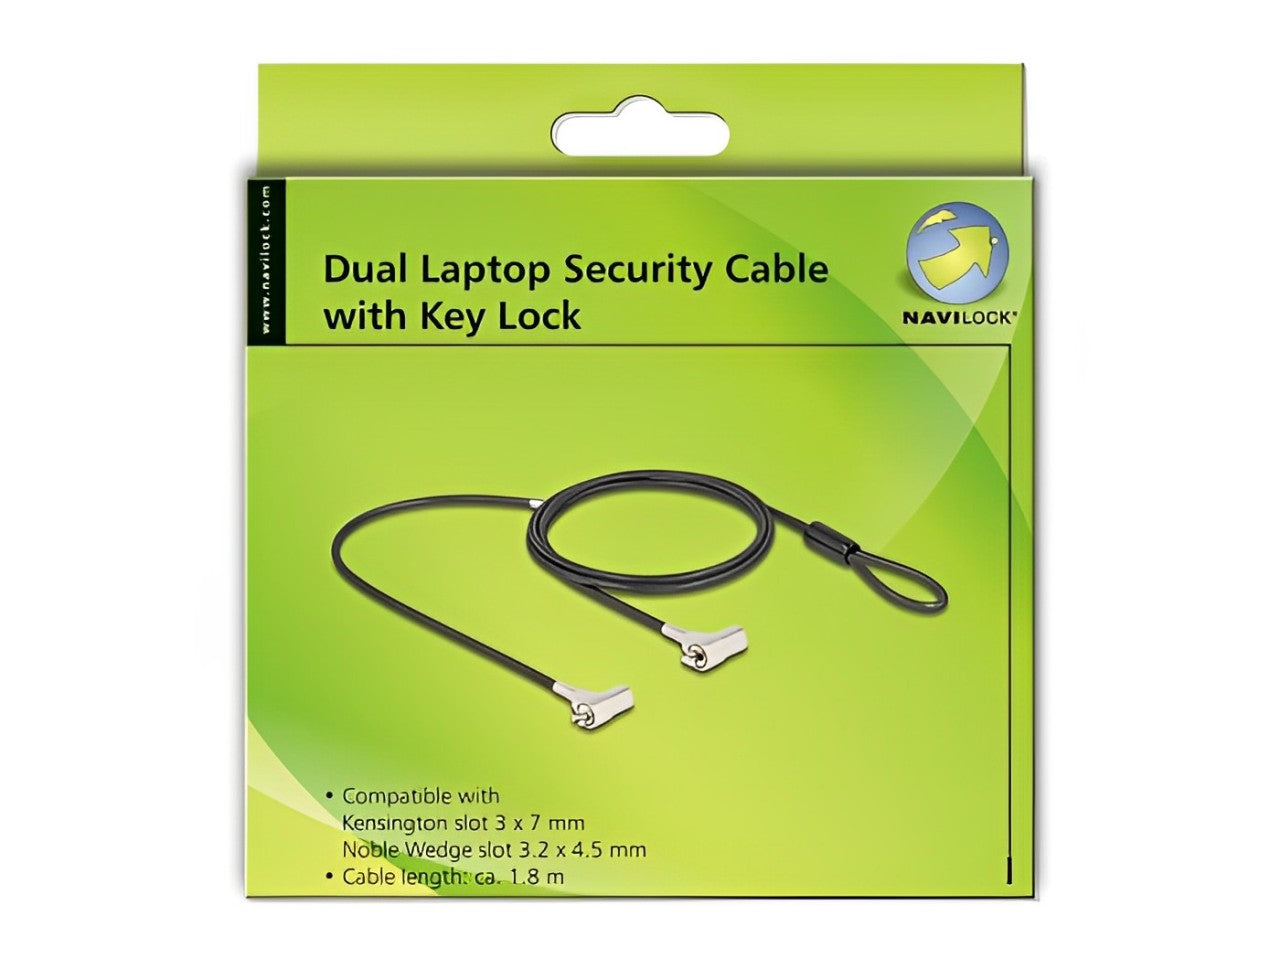 Navilock Dual Laptop Security Cable with Key Lock for Kensington slot 3 x 7 mm and Noble Wedge slot 3.2 x 4.5 mm - delock.israel